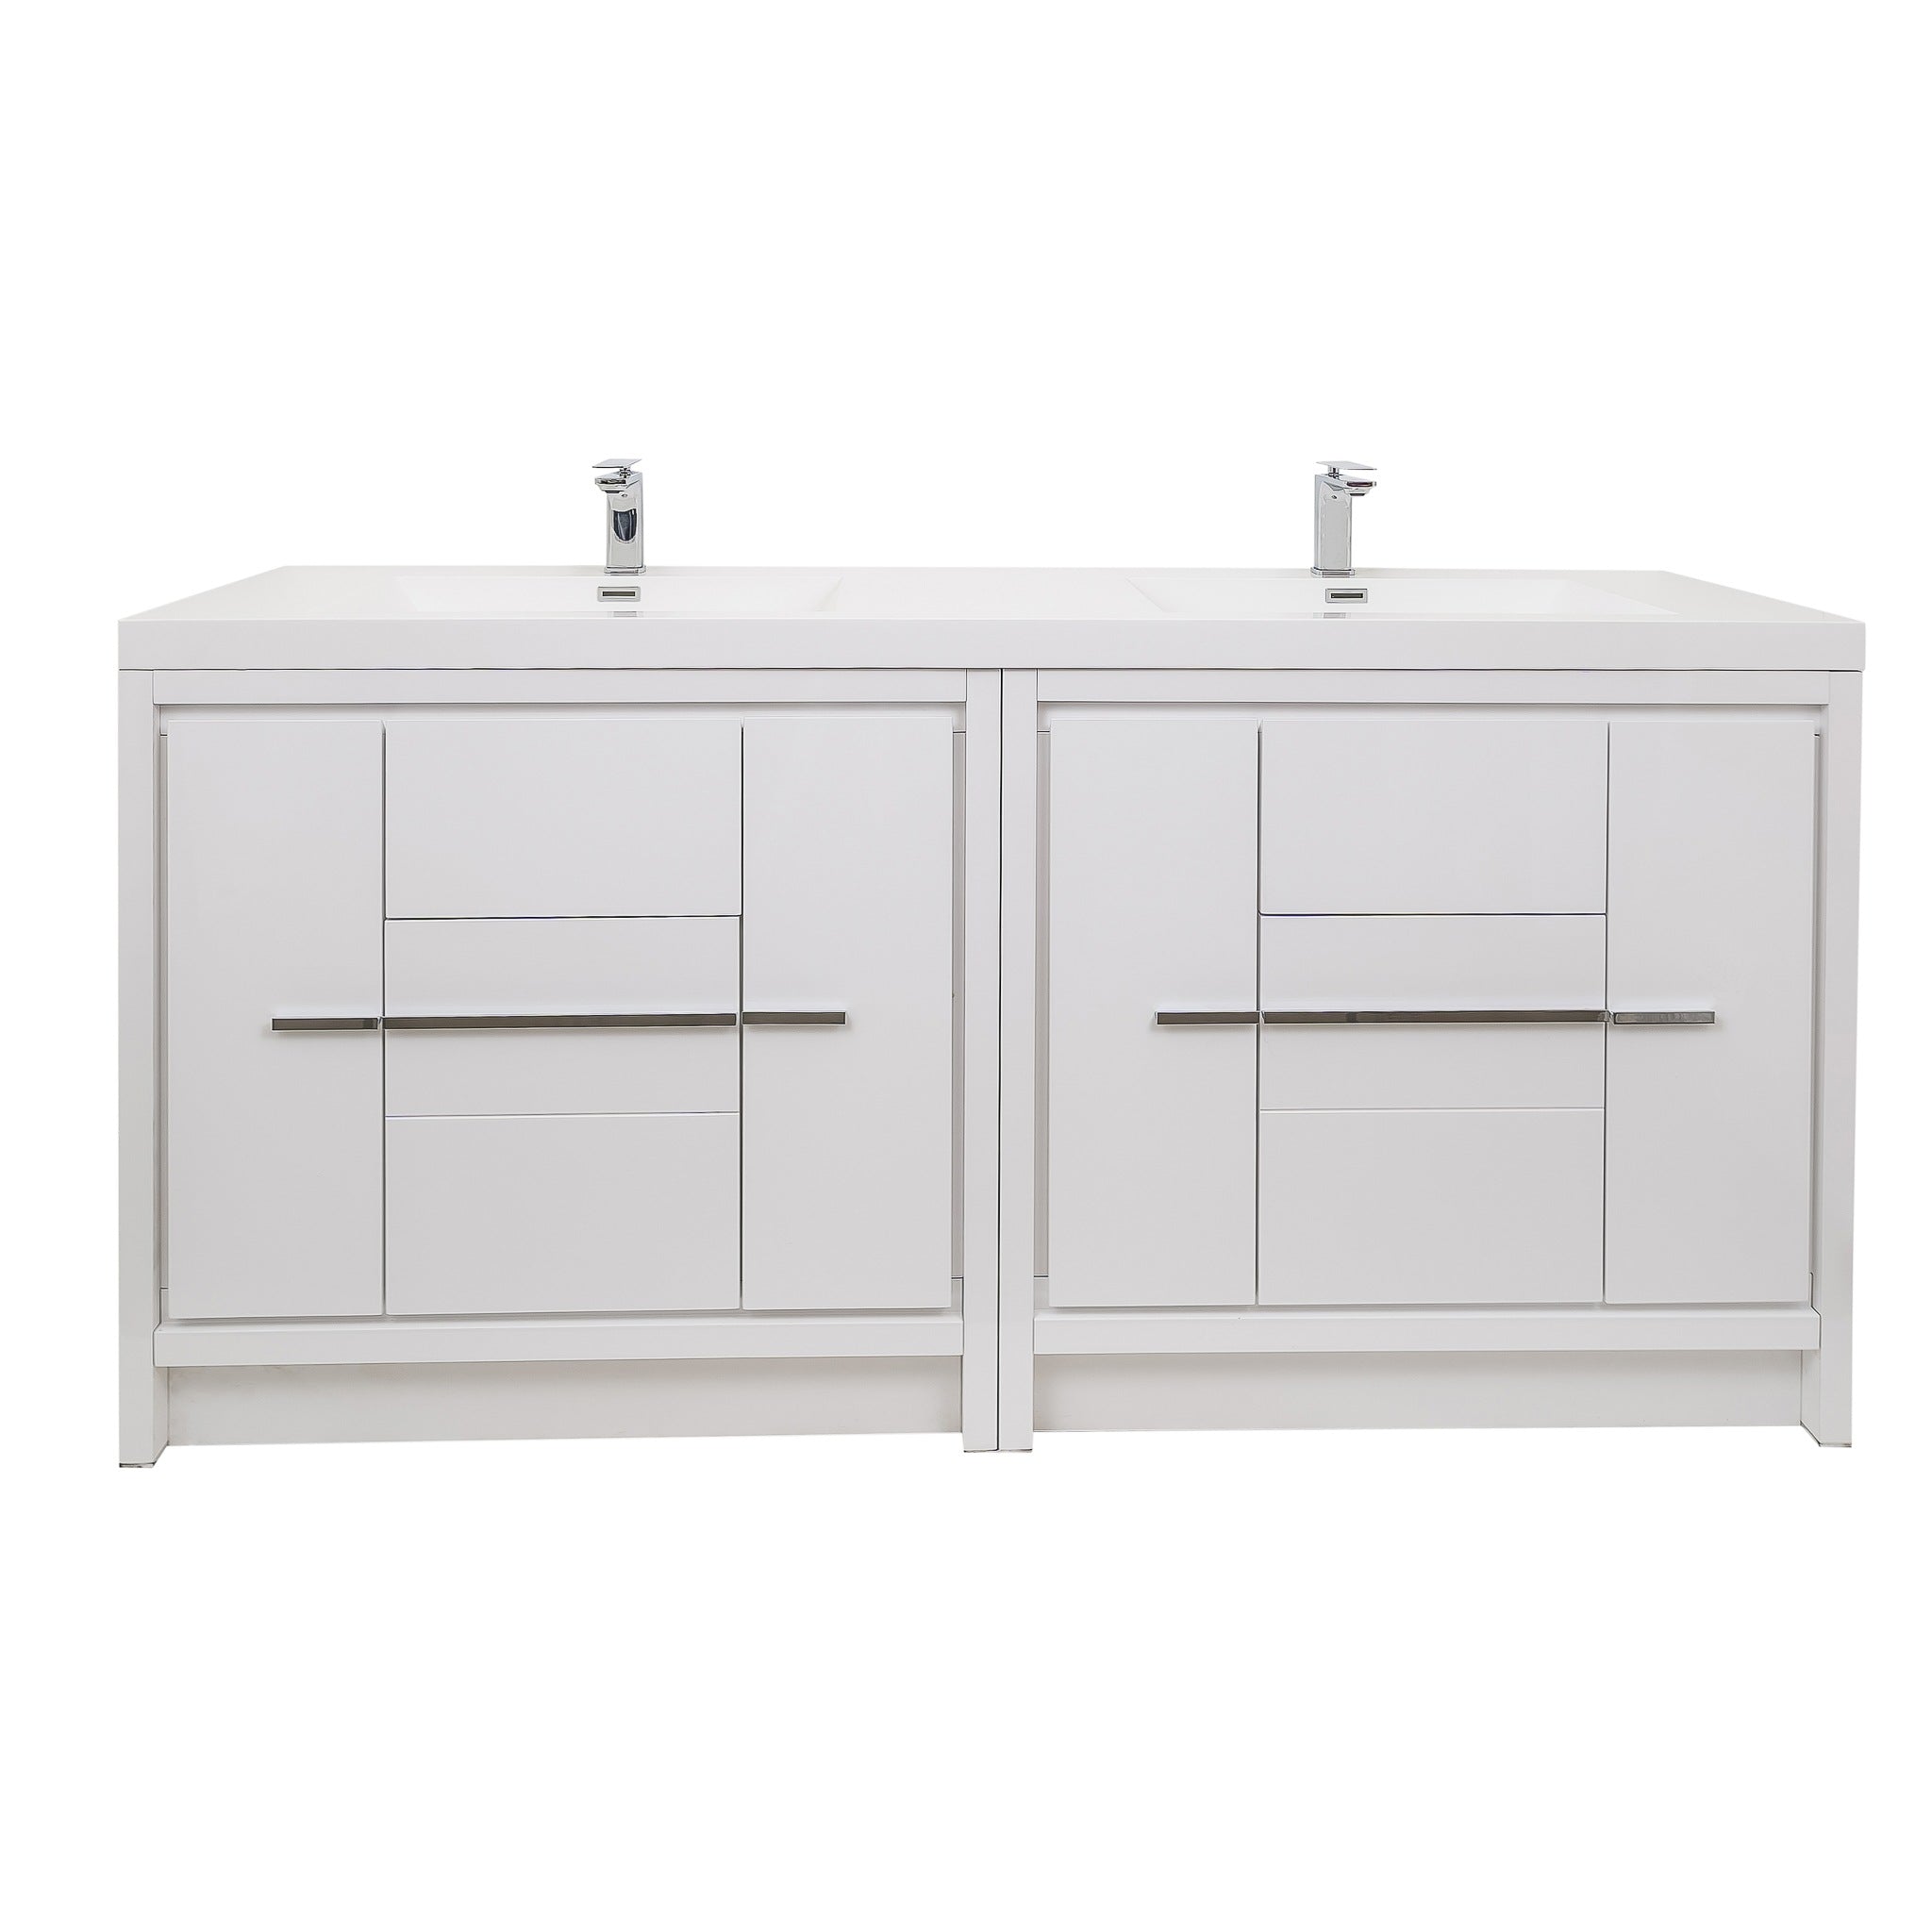 Granada 71 White High Gloss With Chrome Handle Cabinet, Square Cultured Marble Double Sink, Free Standing Modern Vanity Set